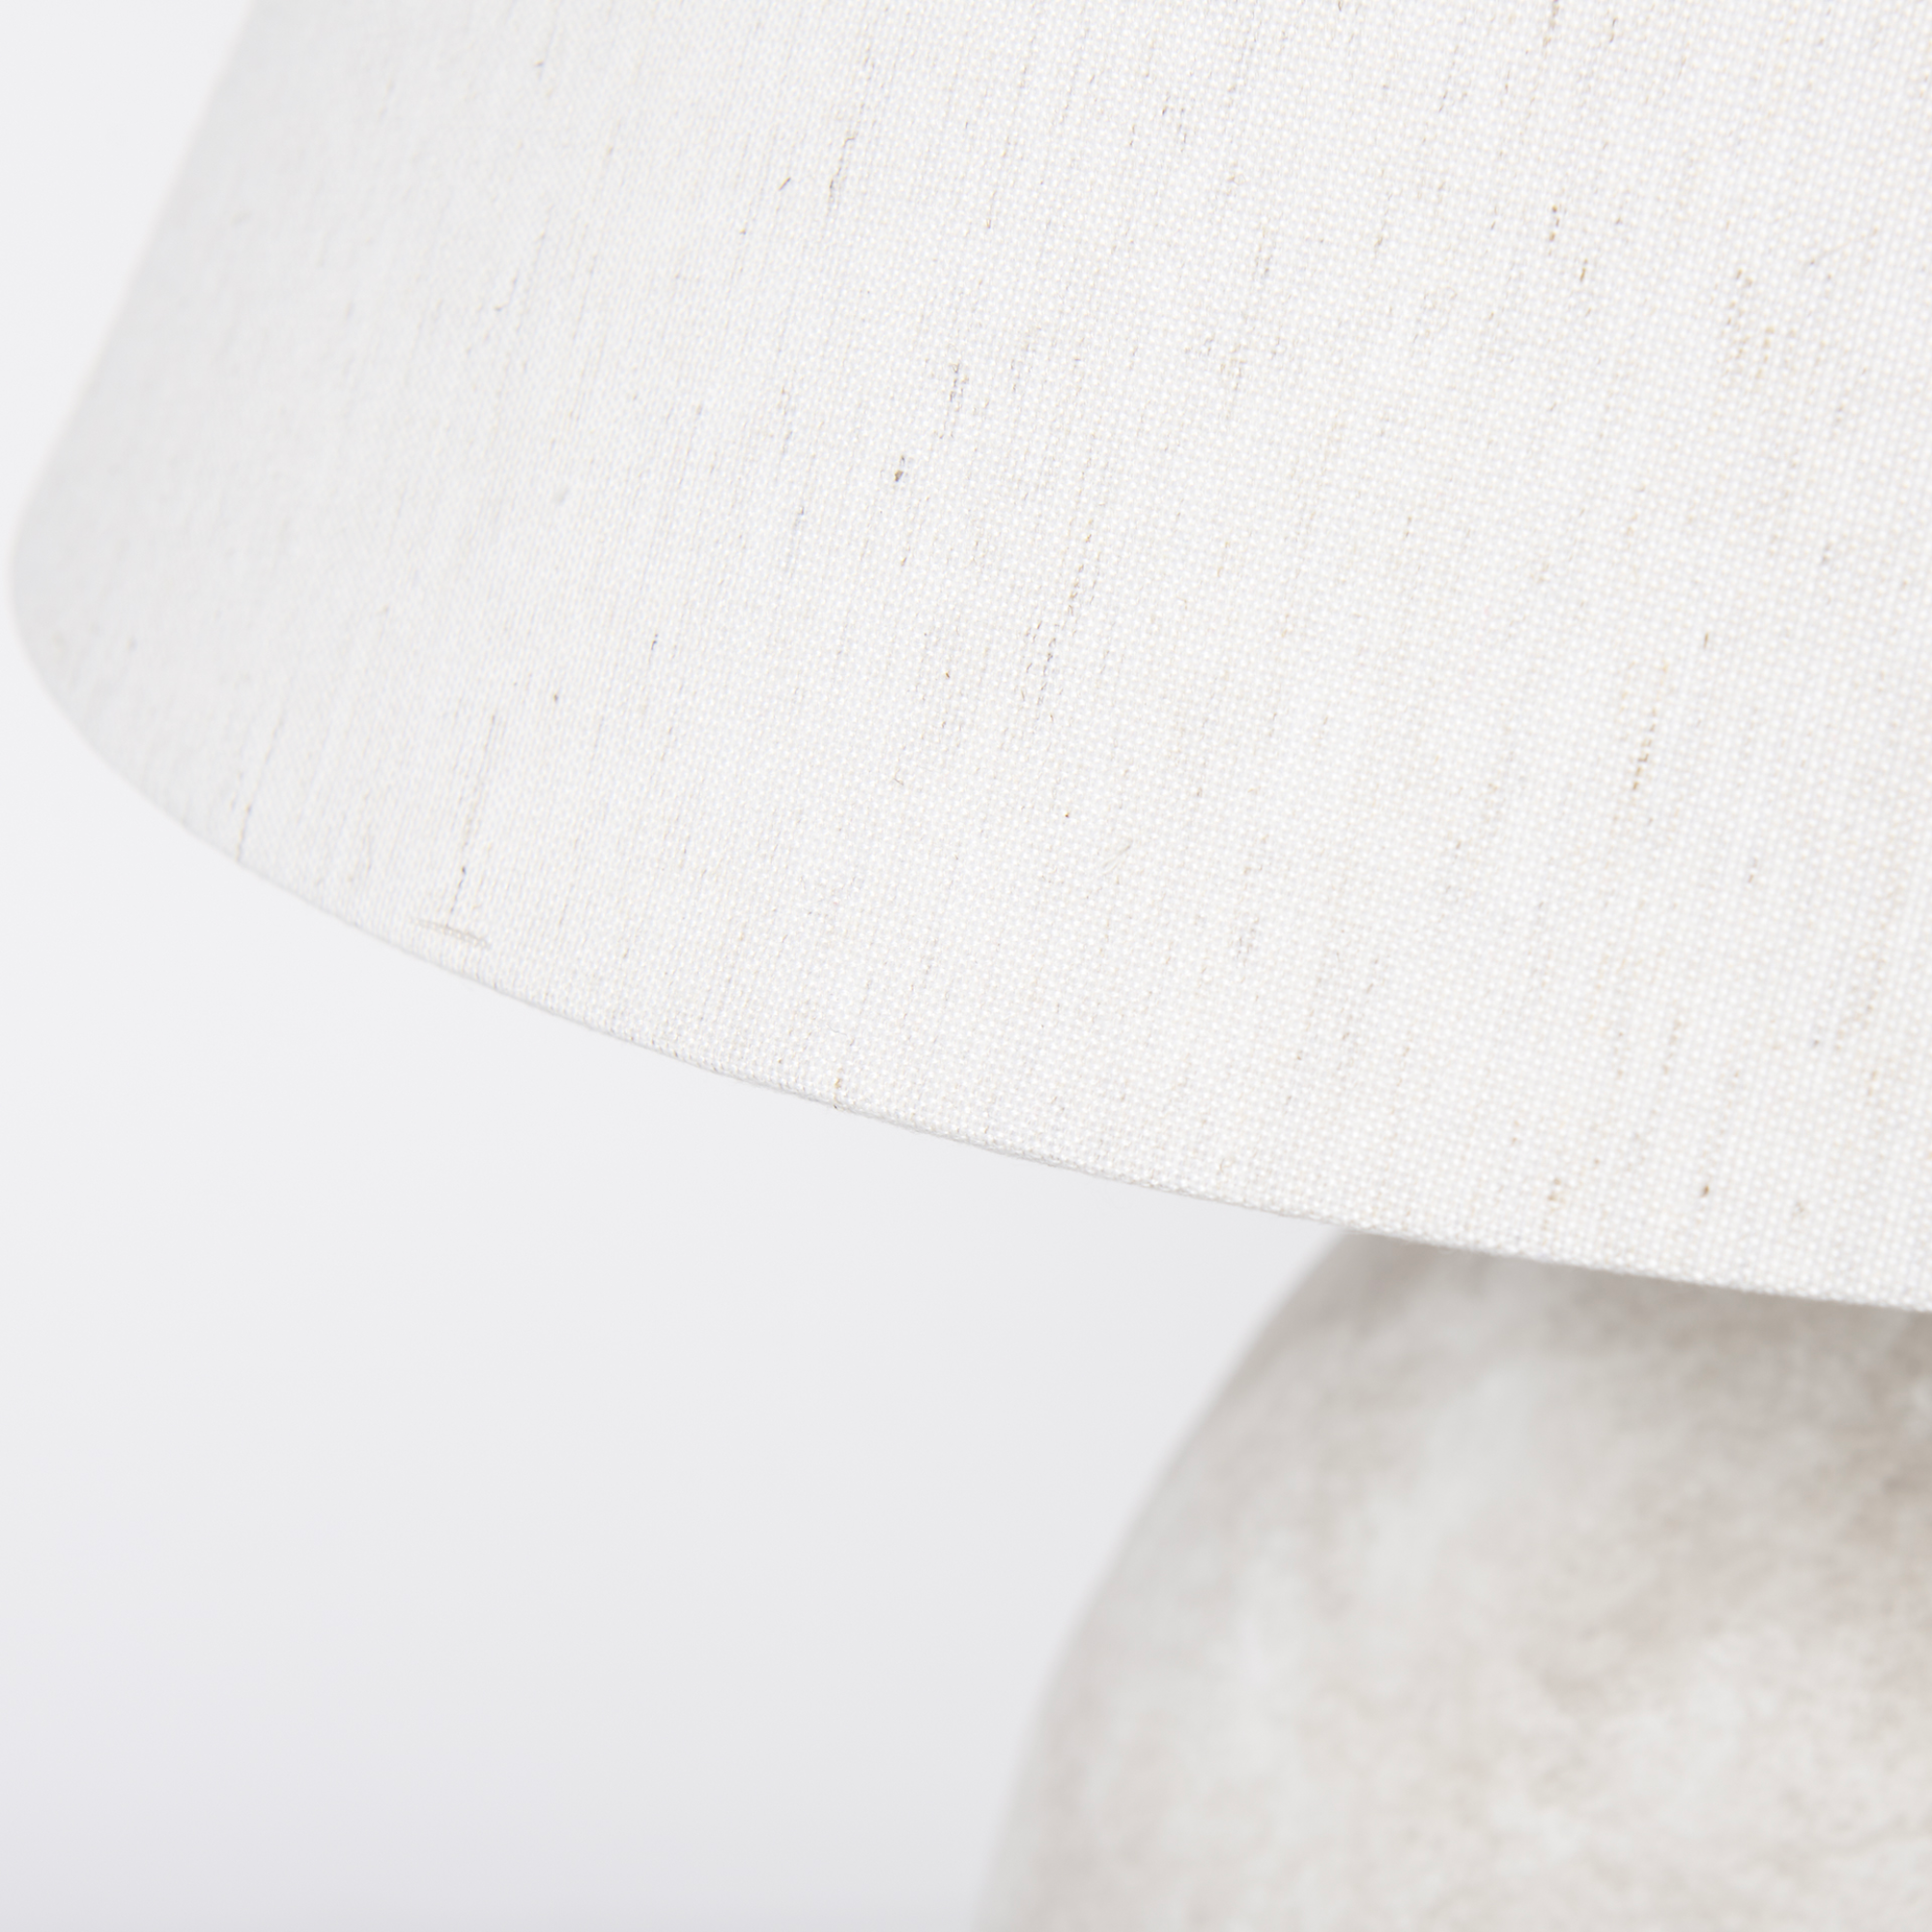 Mindy Table Lamp